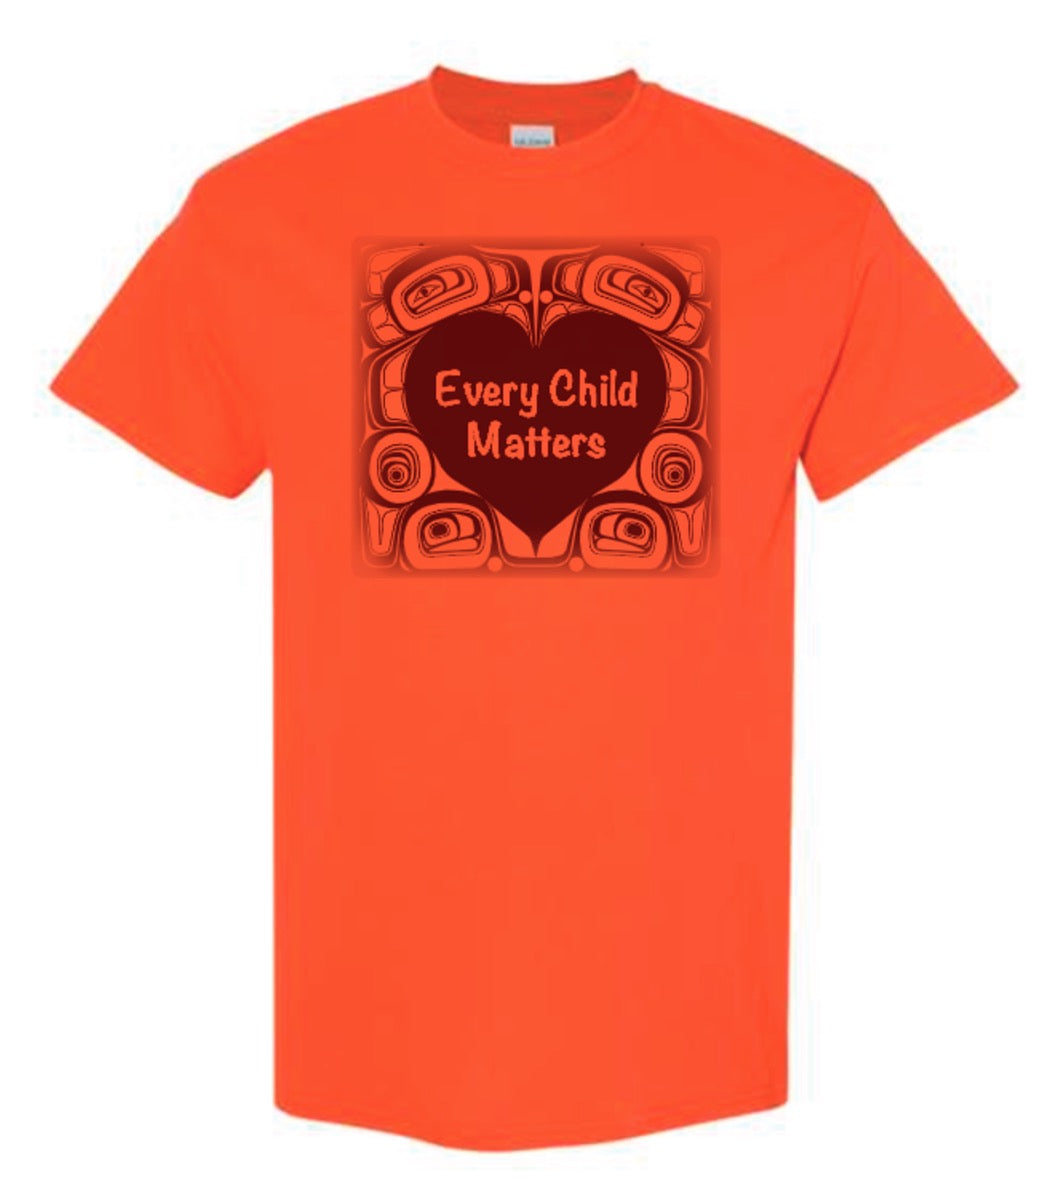 Orange Cotton T-Shirt - “Every Child Matters” by Morgan Asoyuf